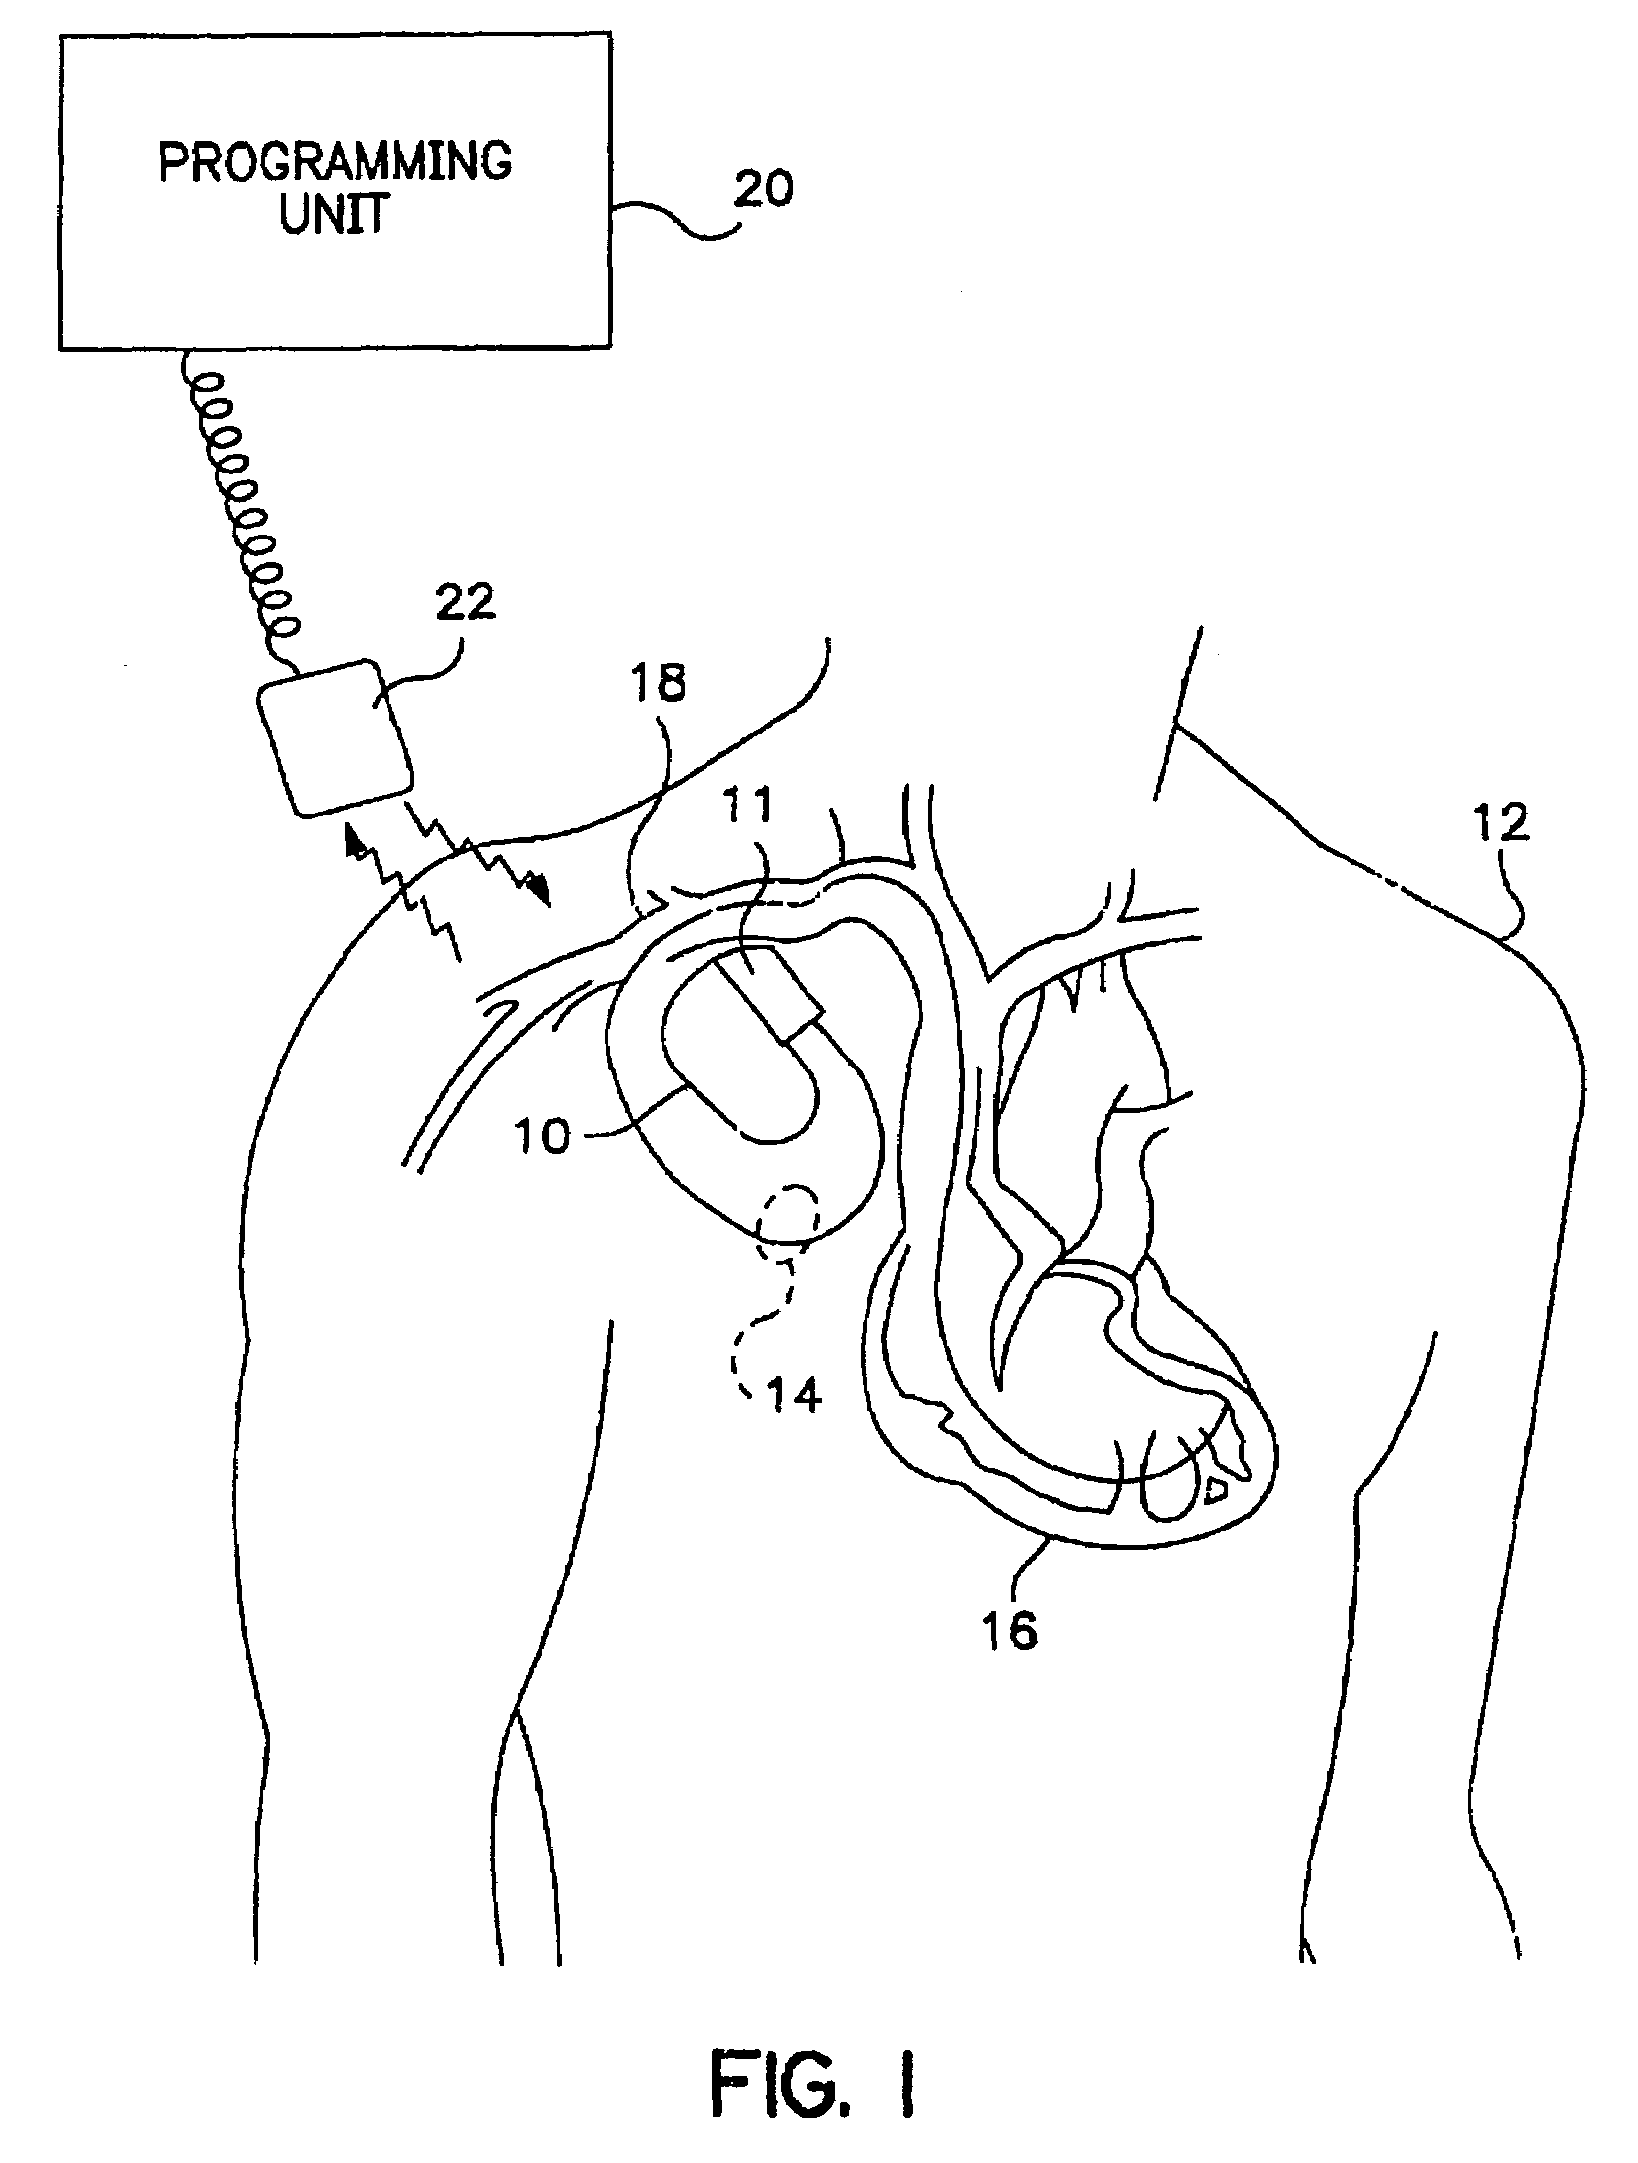 Method of optimizing mechanical heart rate during delivery of coupled or paired pacing